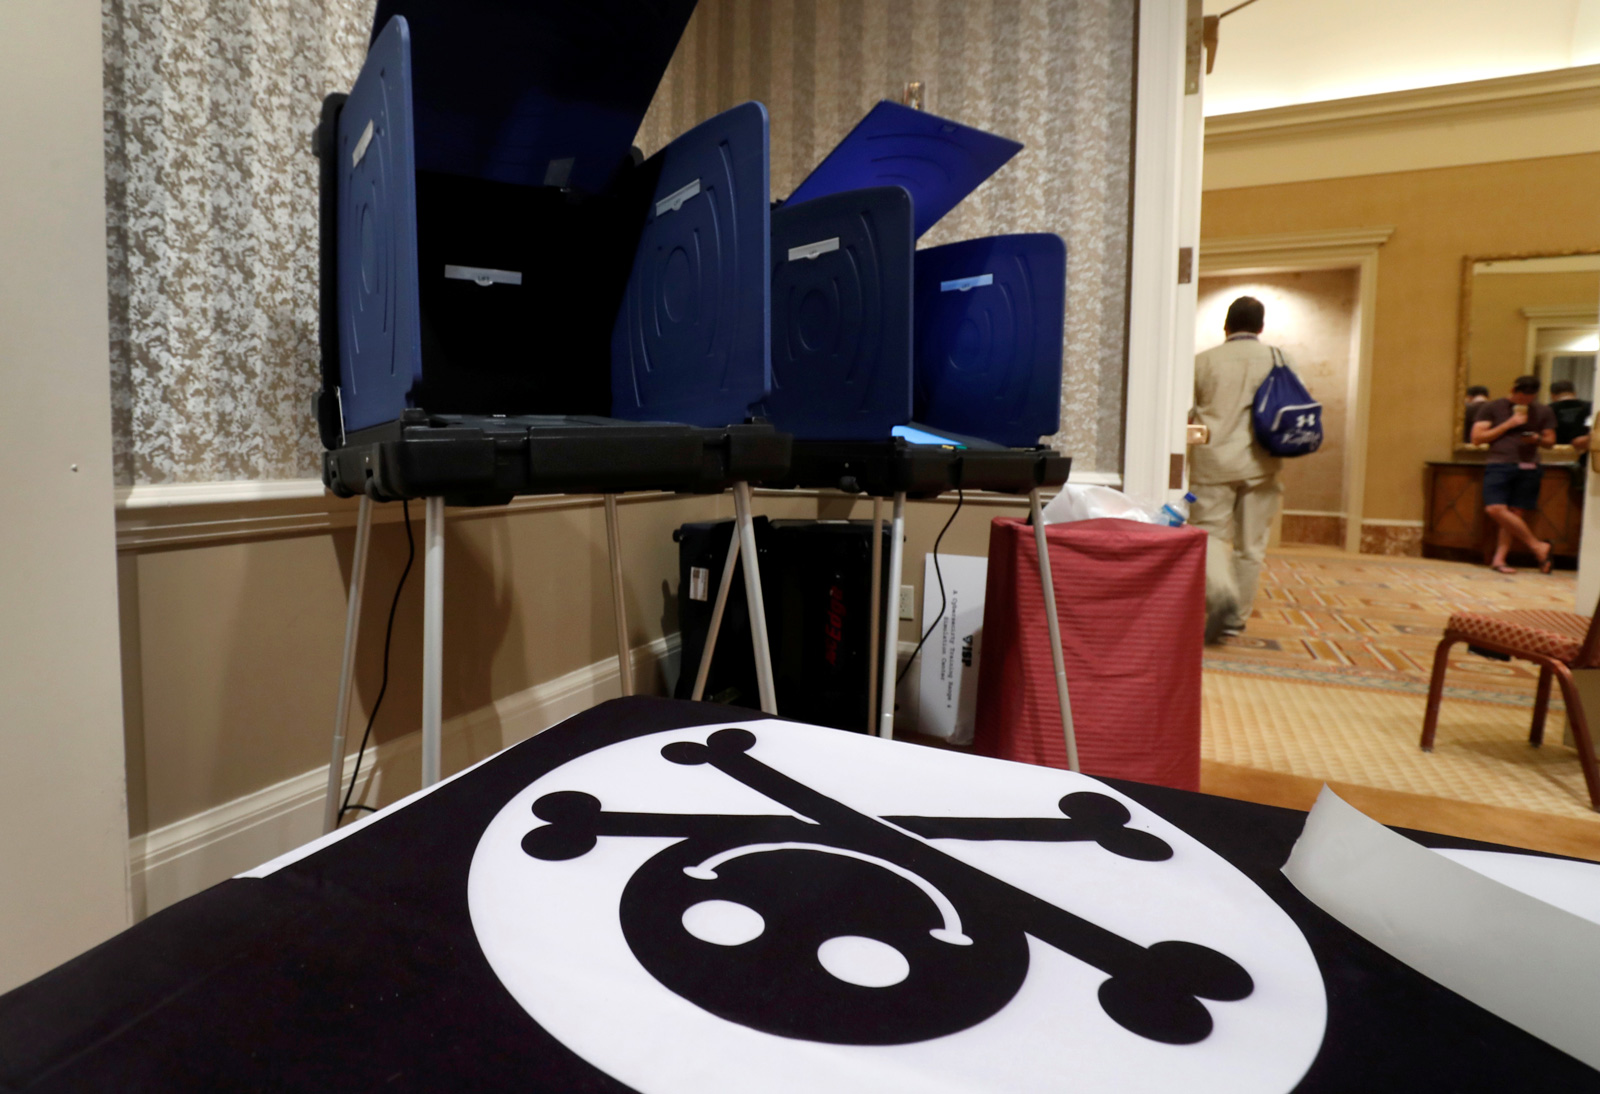 The Voting Machine Hacking Village at the Def Con hacker convention in Las Vegas, Nevada, July 29, 2017